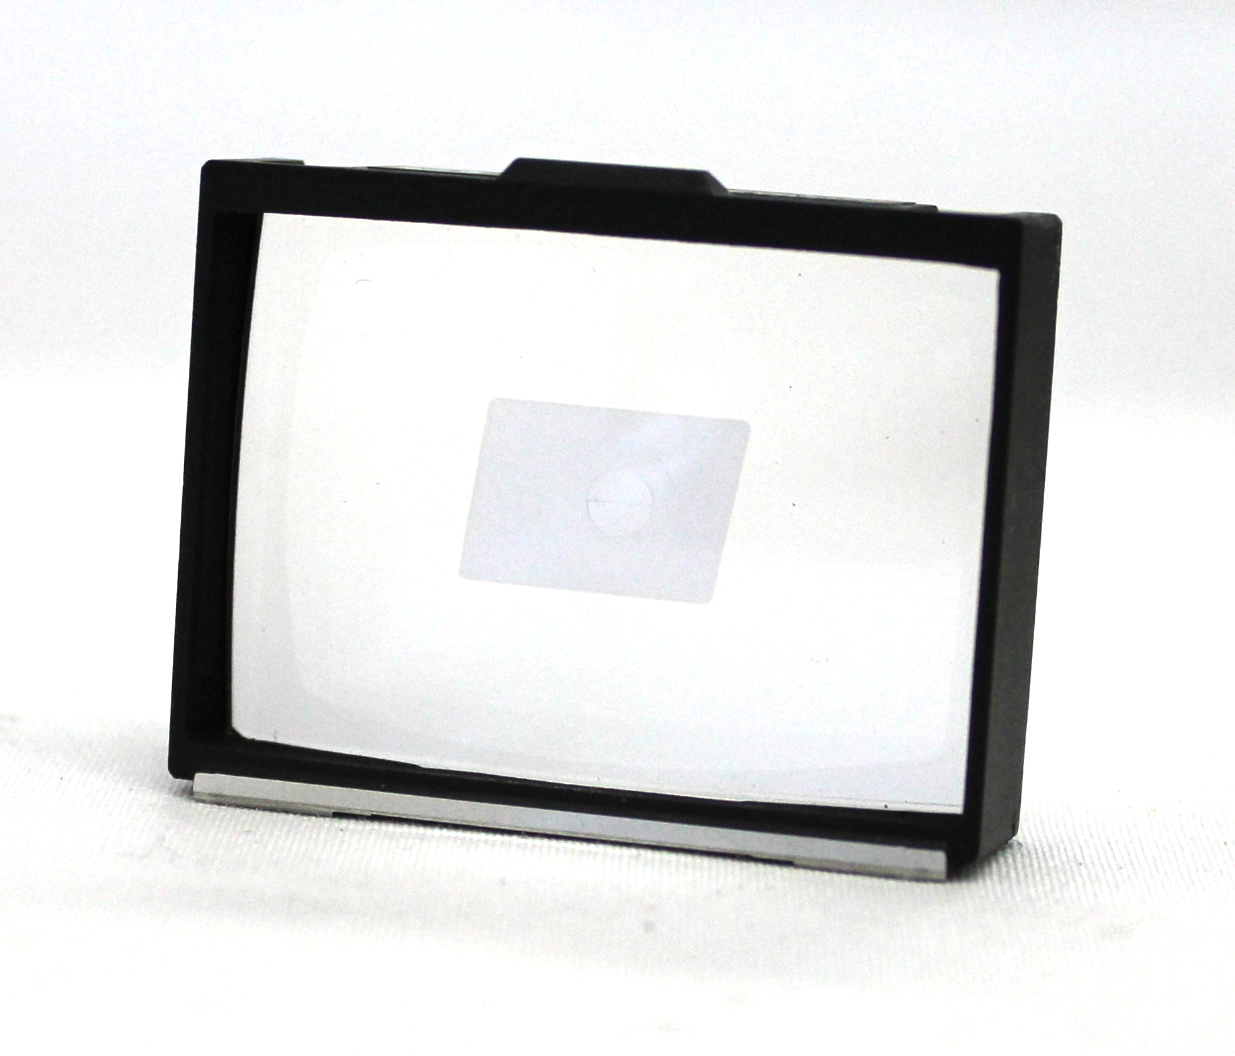  Canon Focusing Screen L Type B Split-Image for F1 SLR Camera from Japan Photo 3